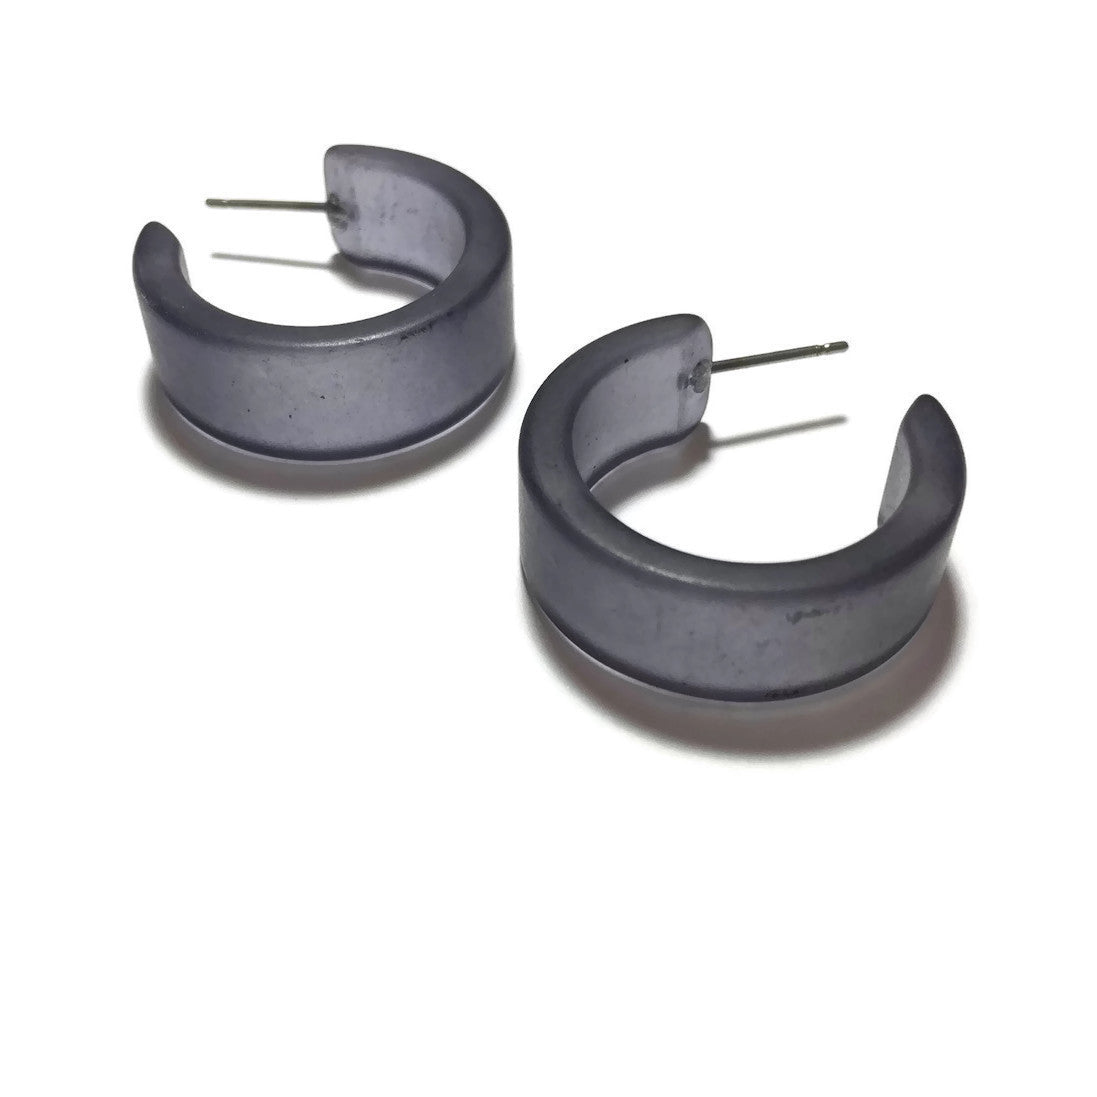 Charcoal Gray Frosted Clara Hoop Earrings